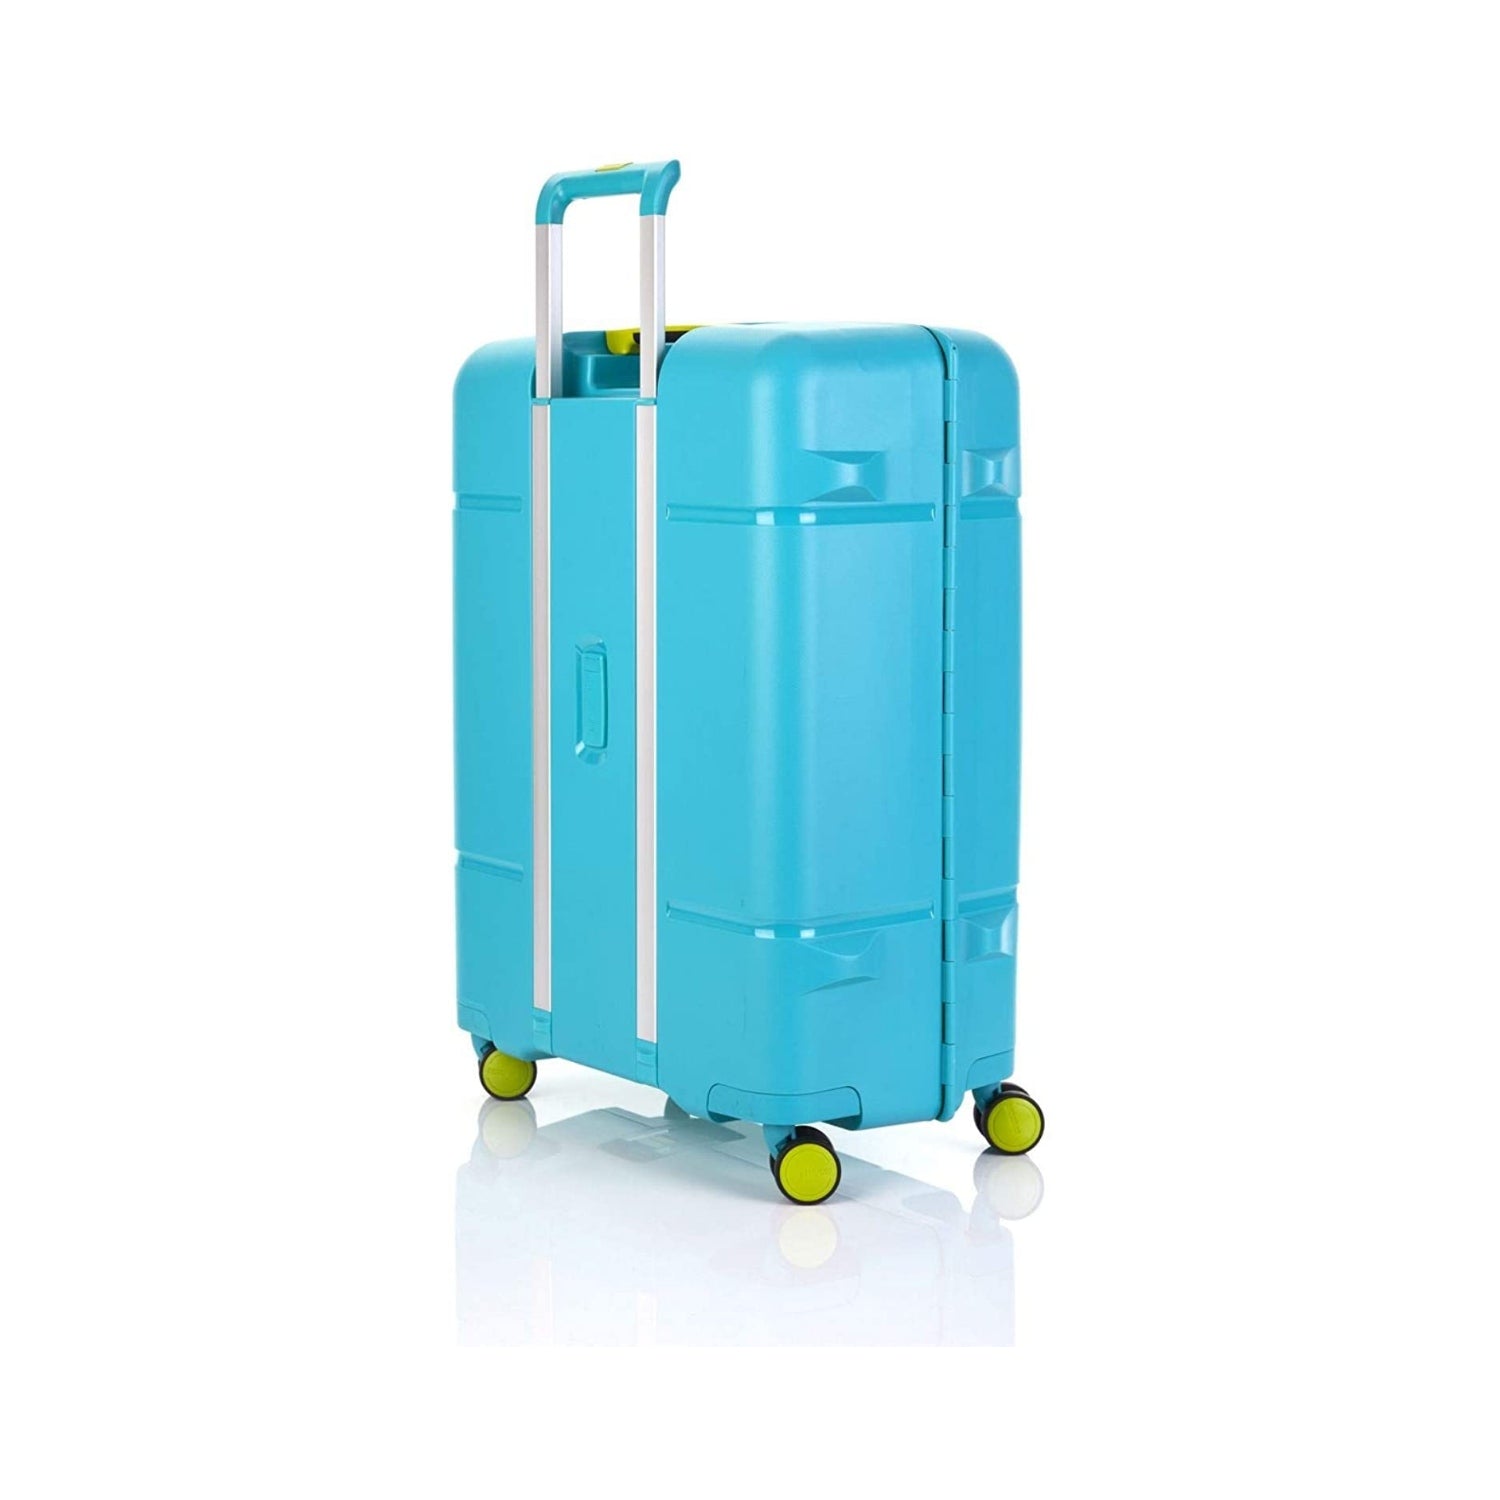 Multicolor American Tourister Luggage Bags